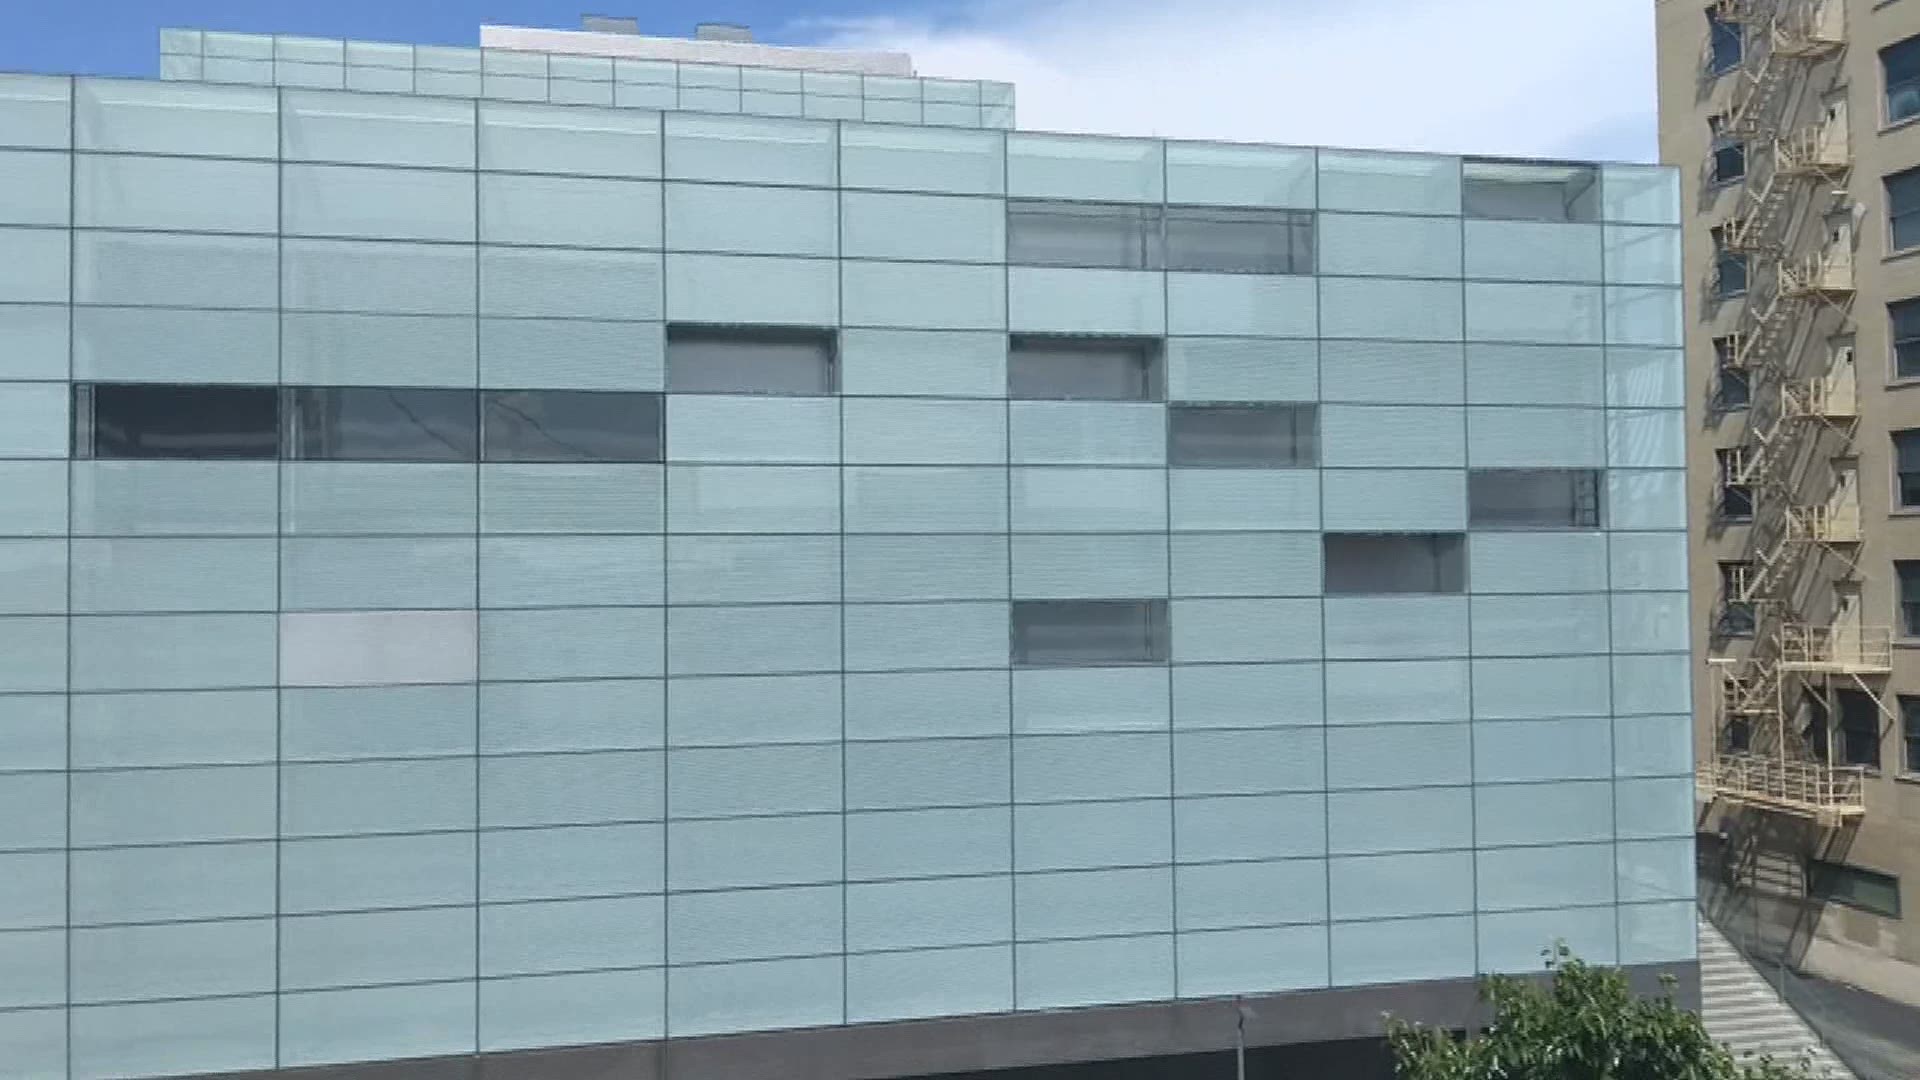 Figge staff were left to clean up the mess from the broken windows. Their staff found evidence of more than 70 shots being fired at and around the museum.